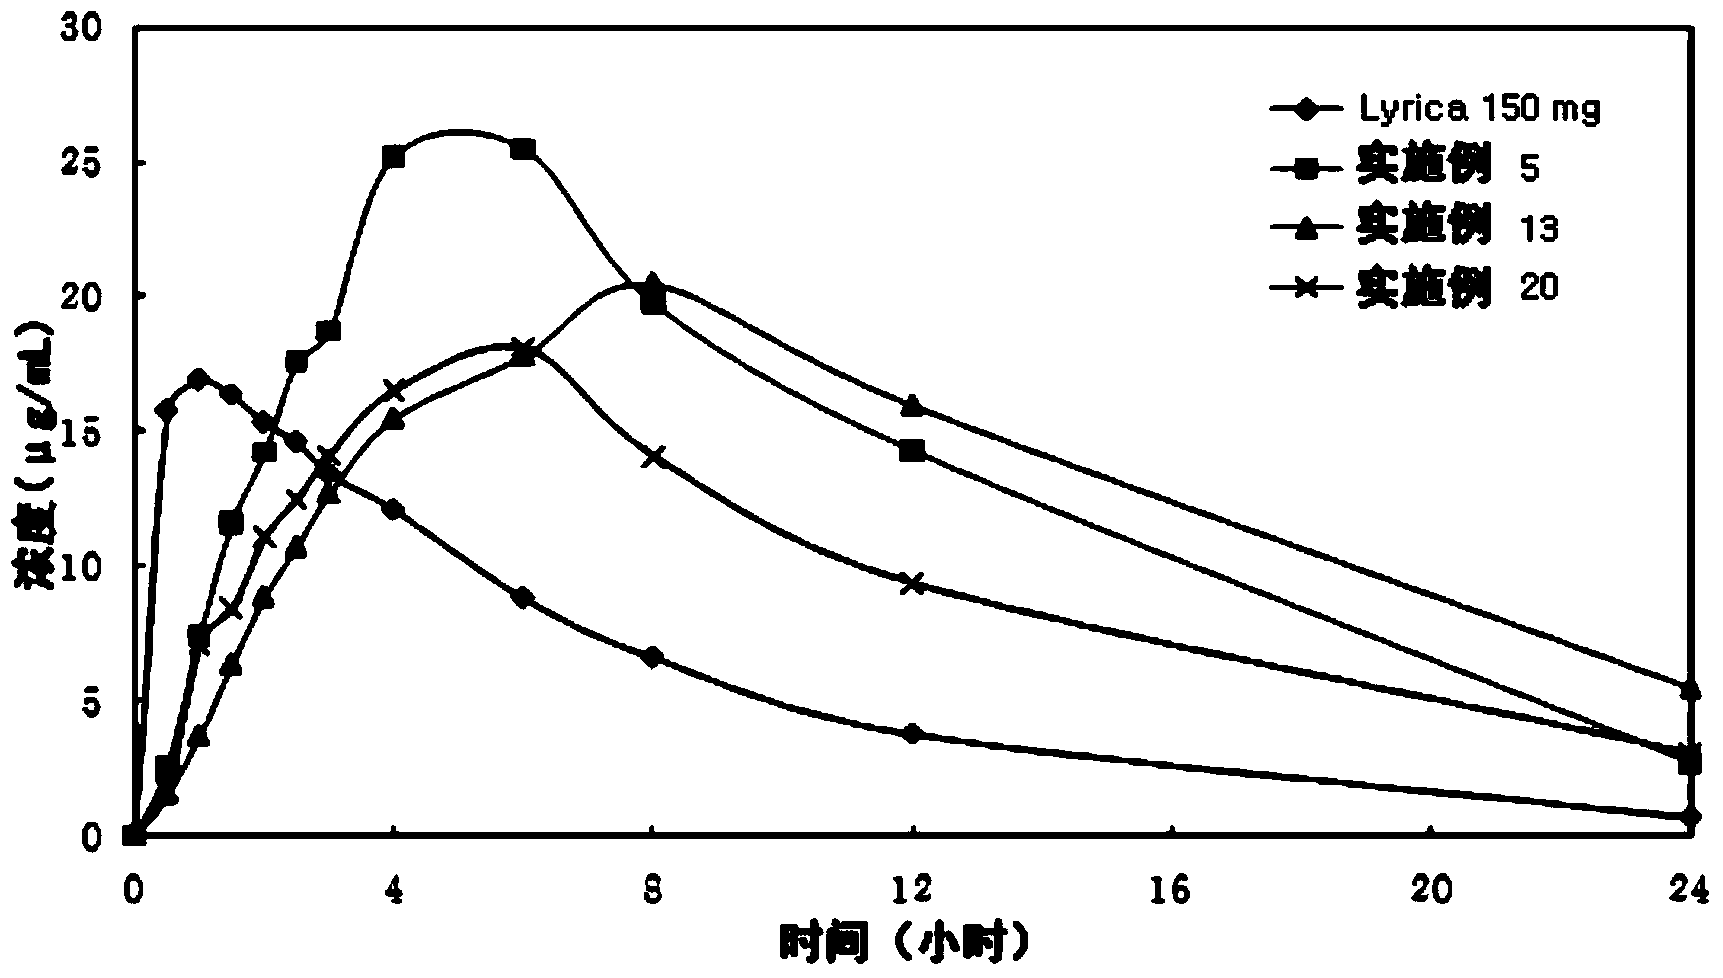 Sustained release tablet comprising pregabalin through two-phase release-controlling system